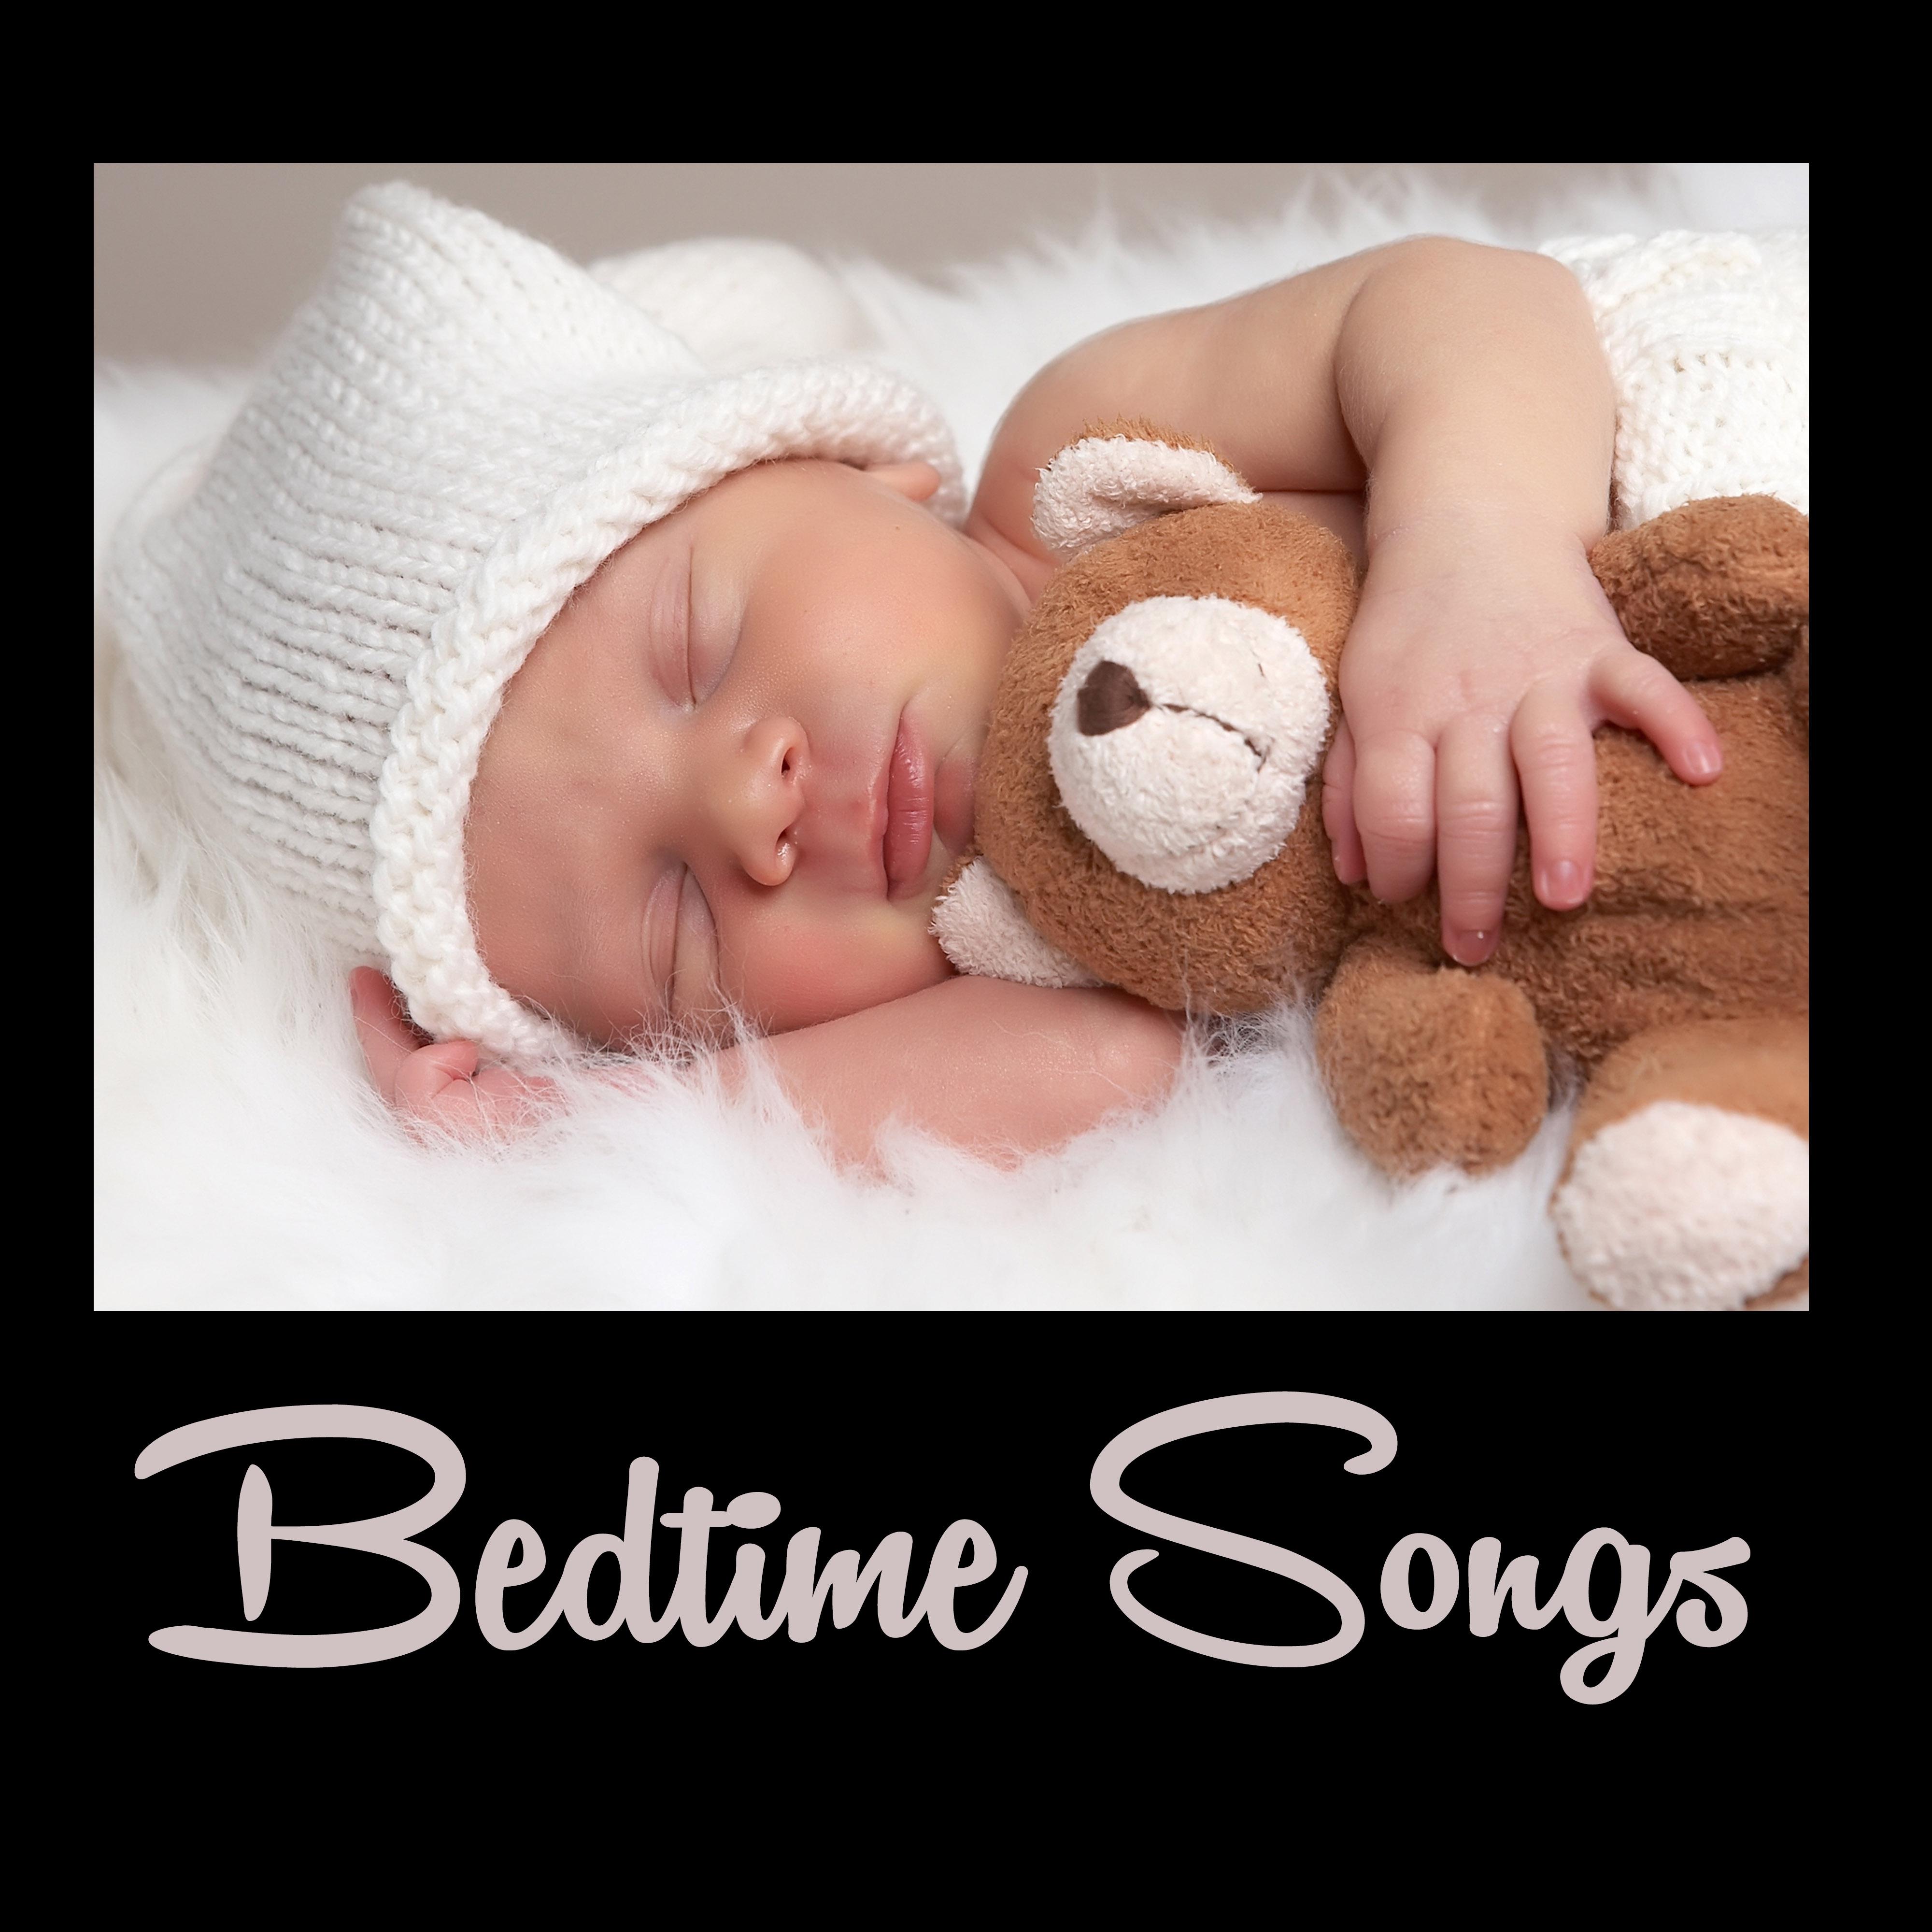 Bedtime Songs - Instrumental Piano Music for Babies and Toddlers Collection